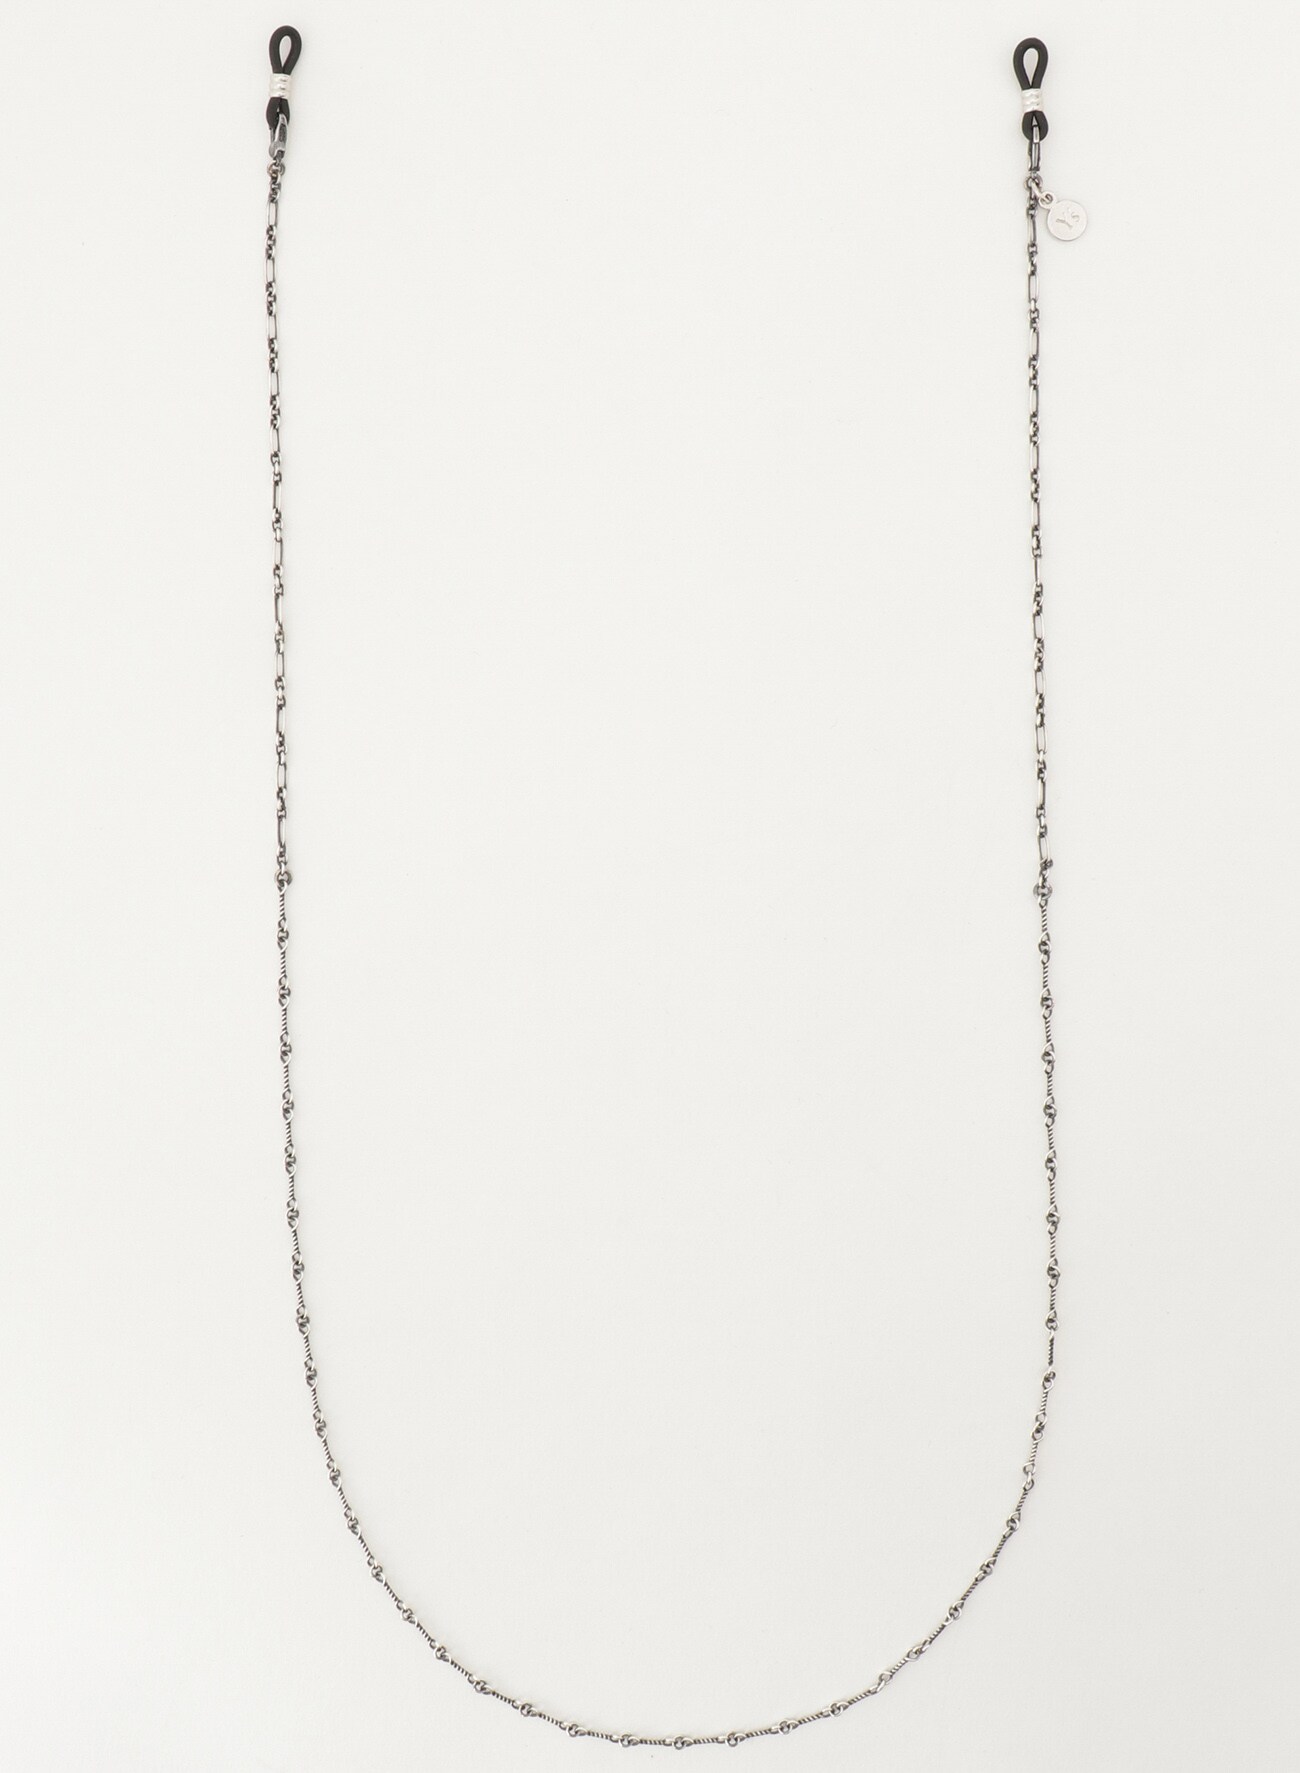 SILVER 925 3 WAYS CHAIN NECKLACE S